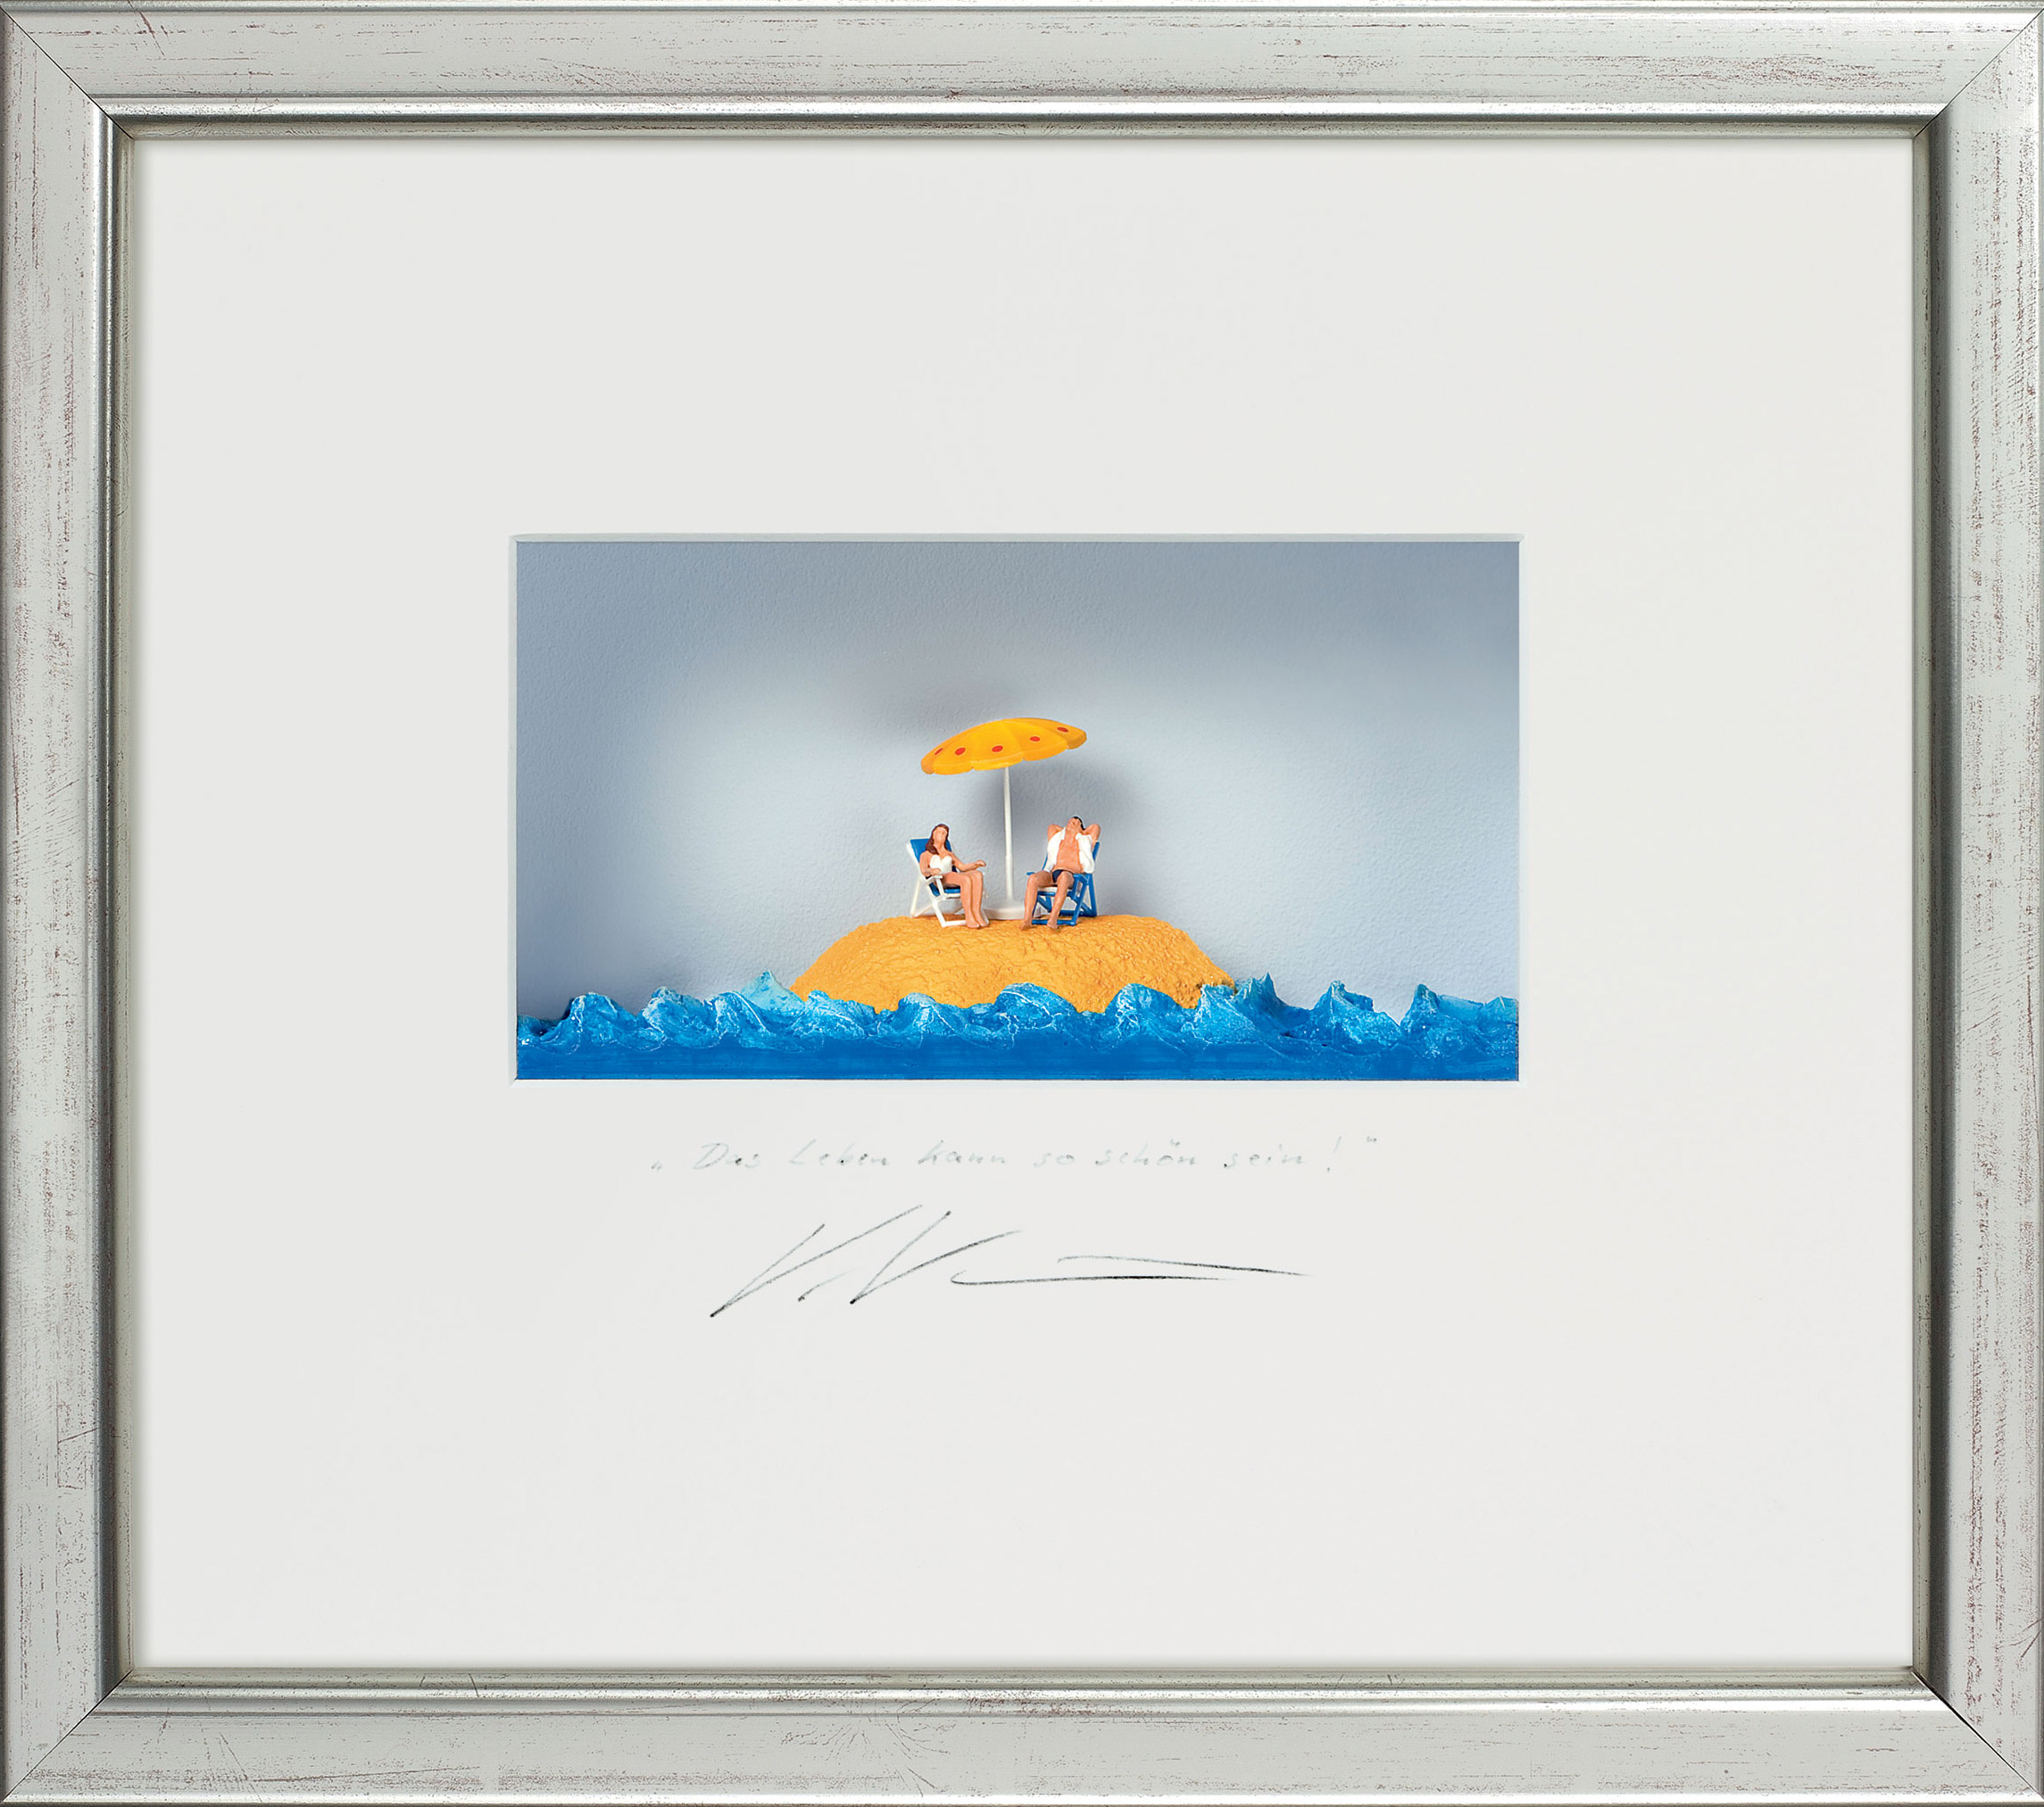 3D Picture "Life Can Be so Beautiful", framed by Volker Kühn